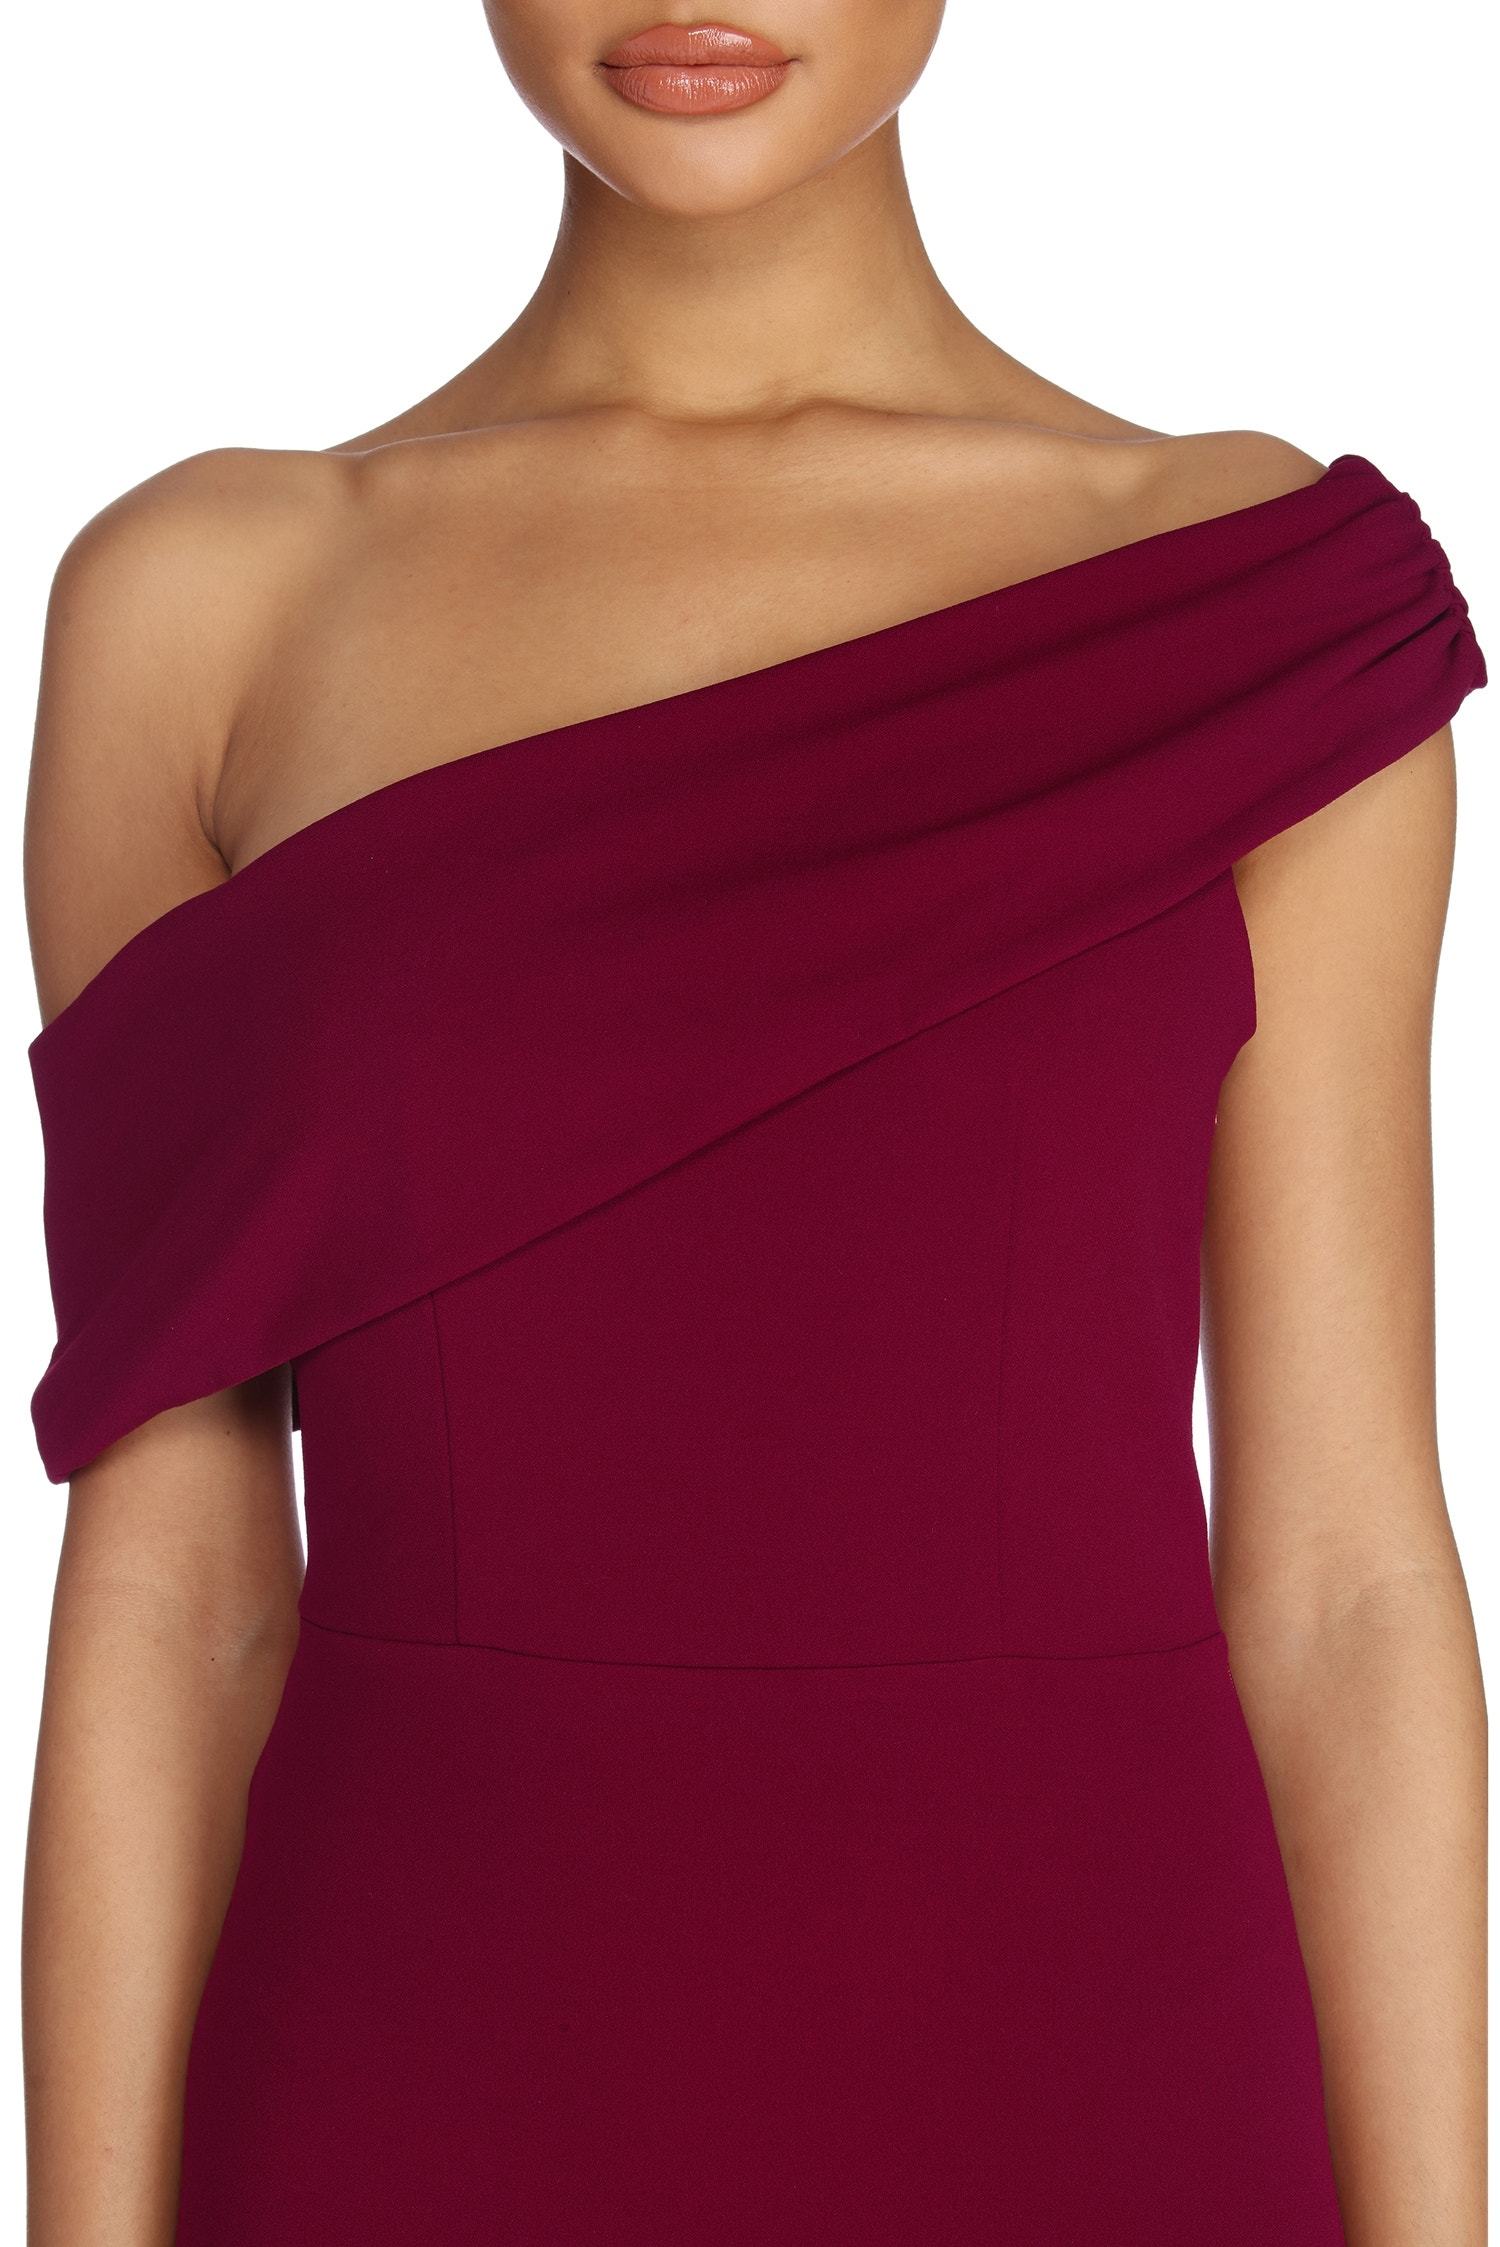 Althea Formal One Shoulder Dress - Lady Occasions